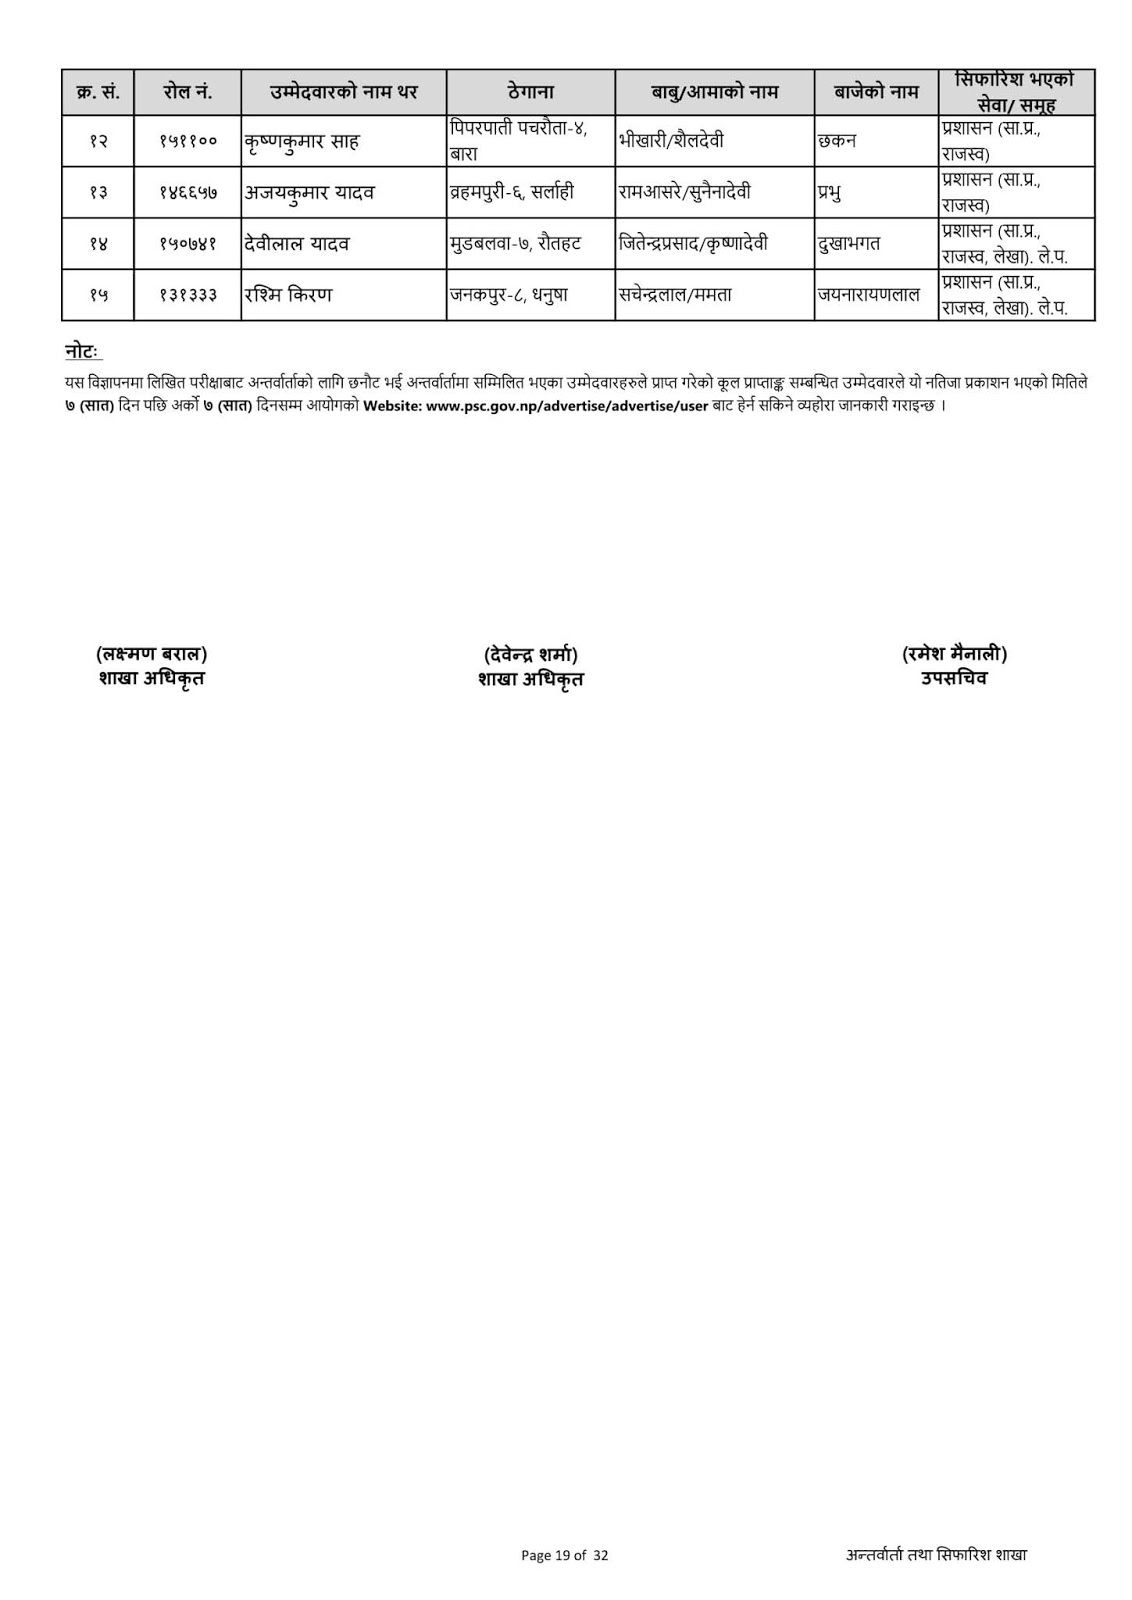 Section Officer Appointment Final Result Published 2075